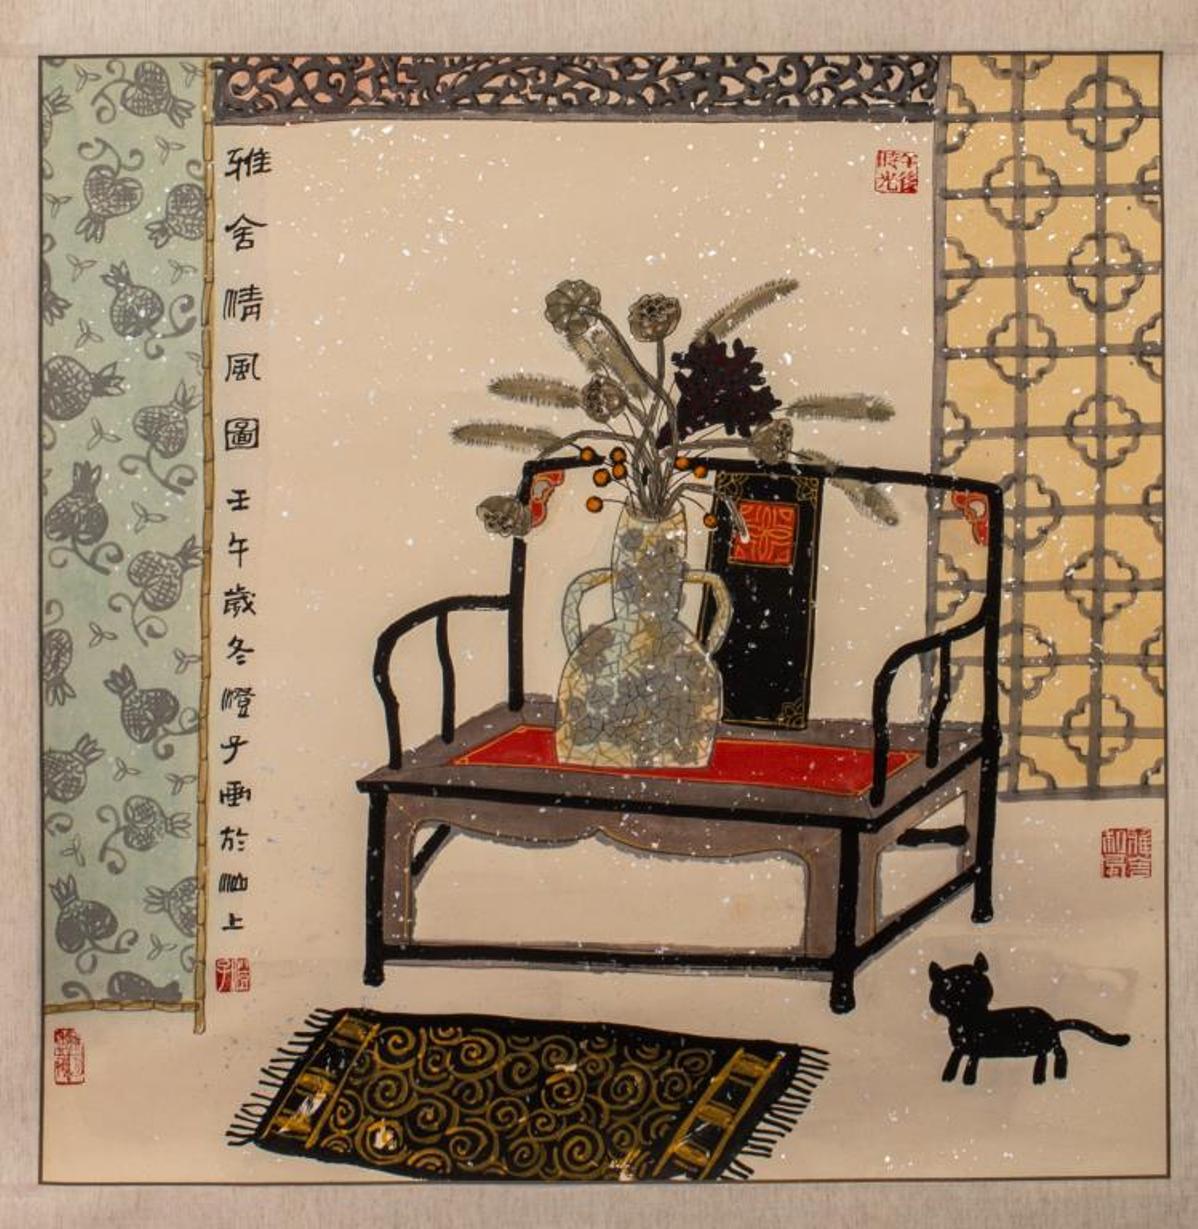 Zhao Chengxiang (Chinese, b. 1953) ink painting on paper scroll depicting a flower still life scene with cat, signed.
Note: Zhao Chengxiang is a native of the Shantou, Guangdong Province and is a prominent member of the Guangdong Artists Association